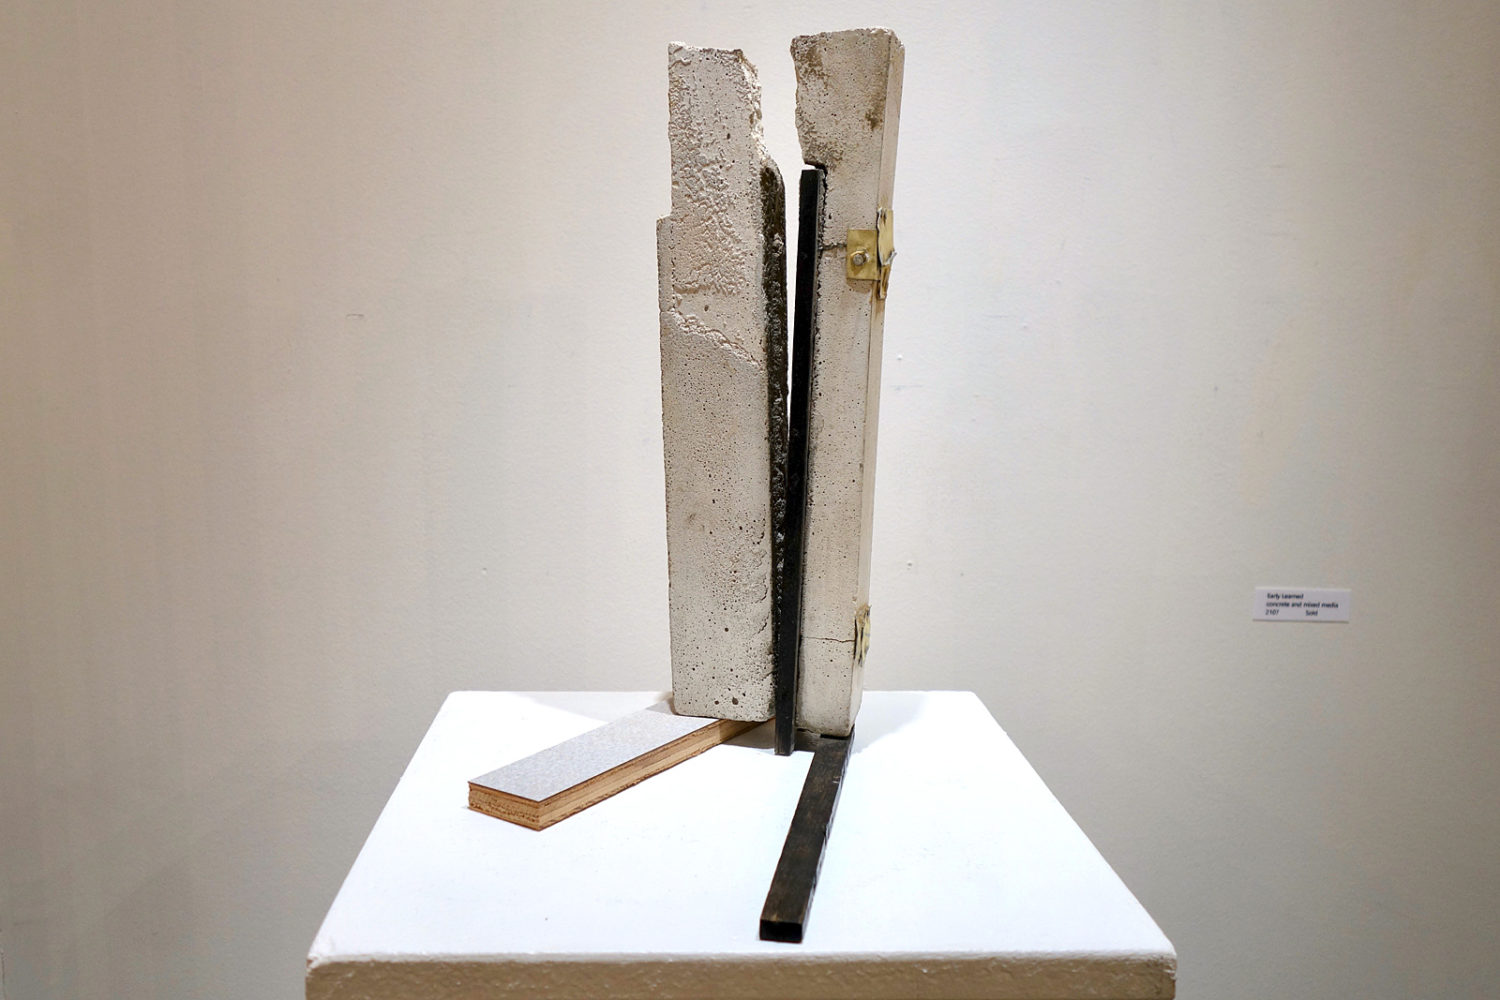 Kenneth Martin sculpture "Early Learned" 2017 on display at Warren Philips Gallery in Rochester, New York